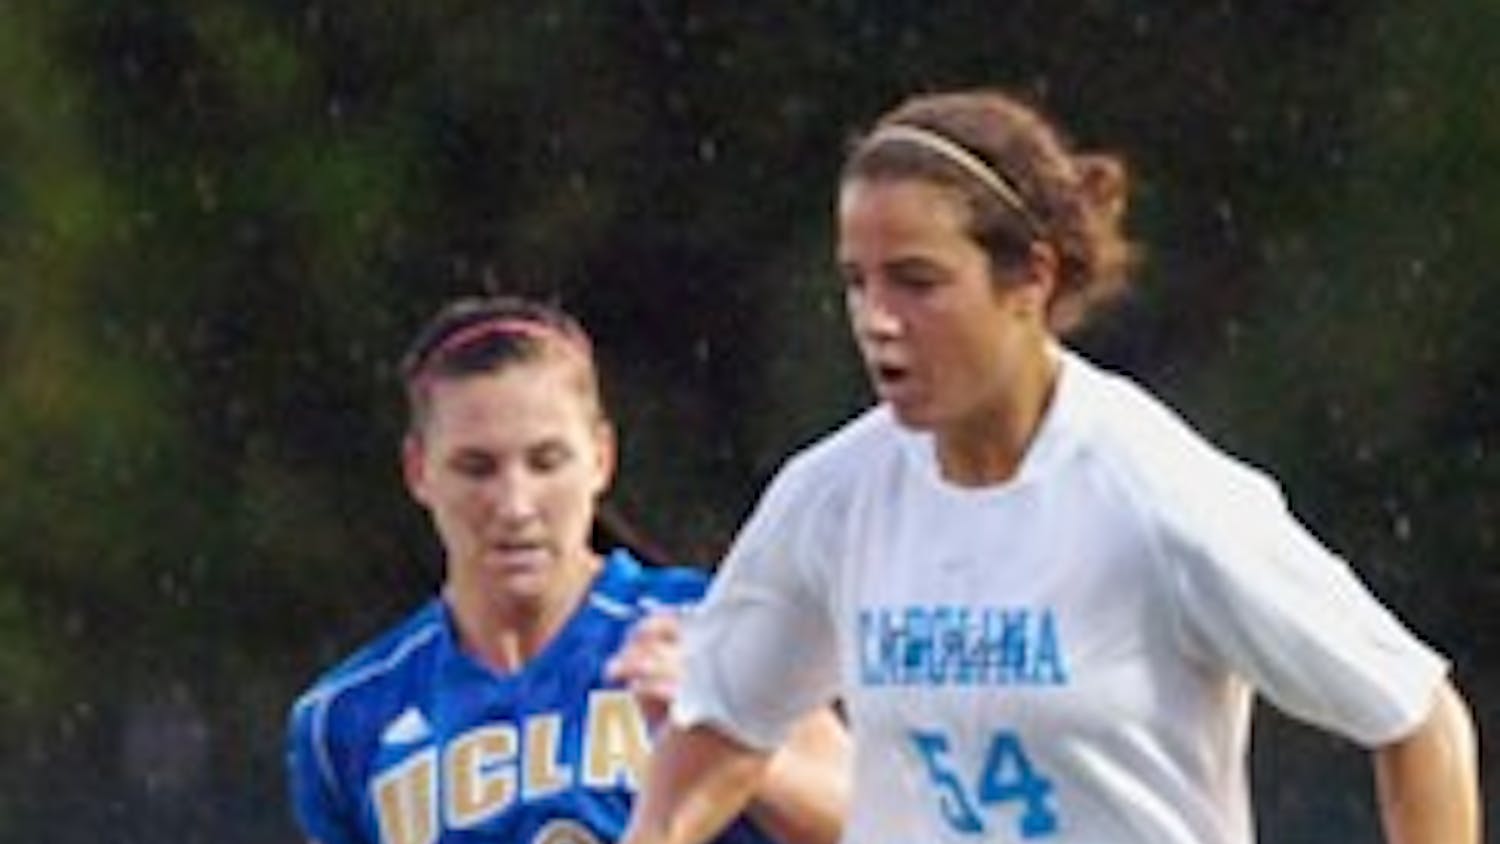 Casey Nogueira led UNC to a national title in 2008 with two goals in the championship game. DTH/Andrew Dye